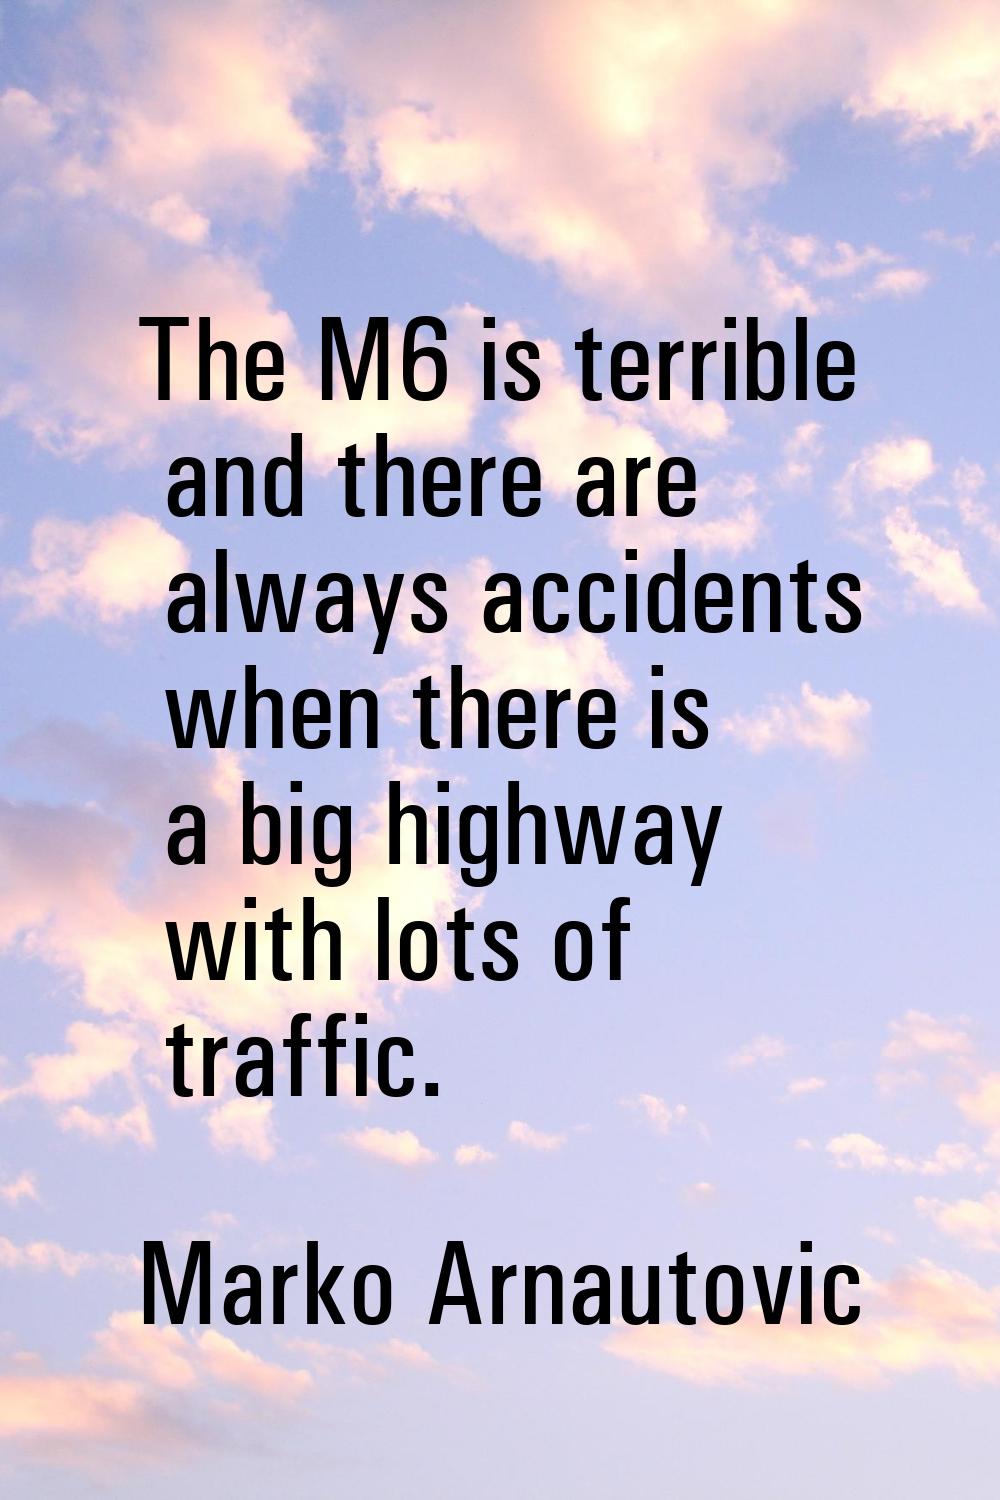 The M6 is terrible and there are always accidents when there is a big highway with lots of traffic.